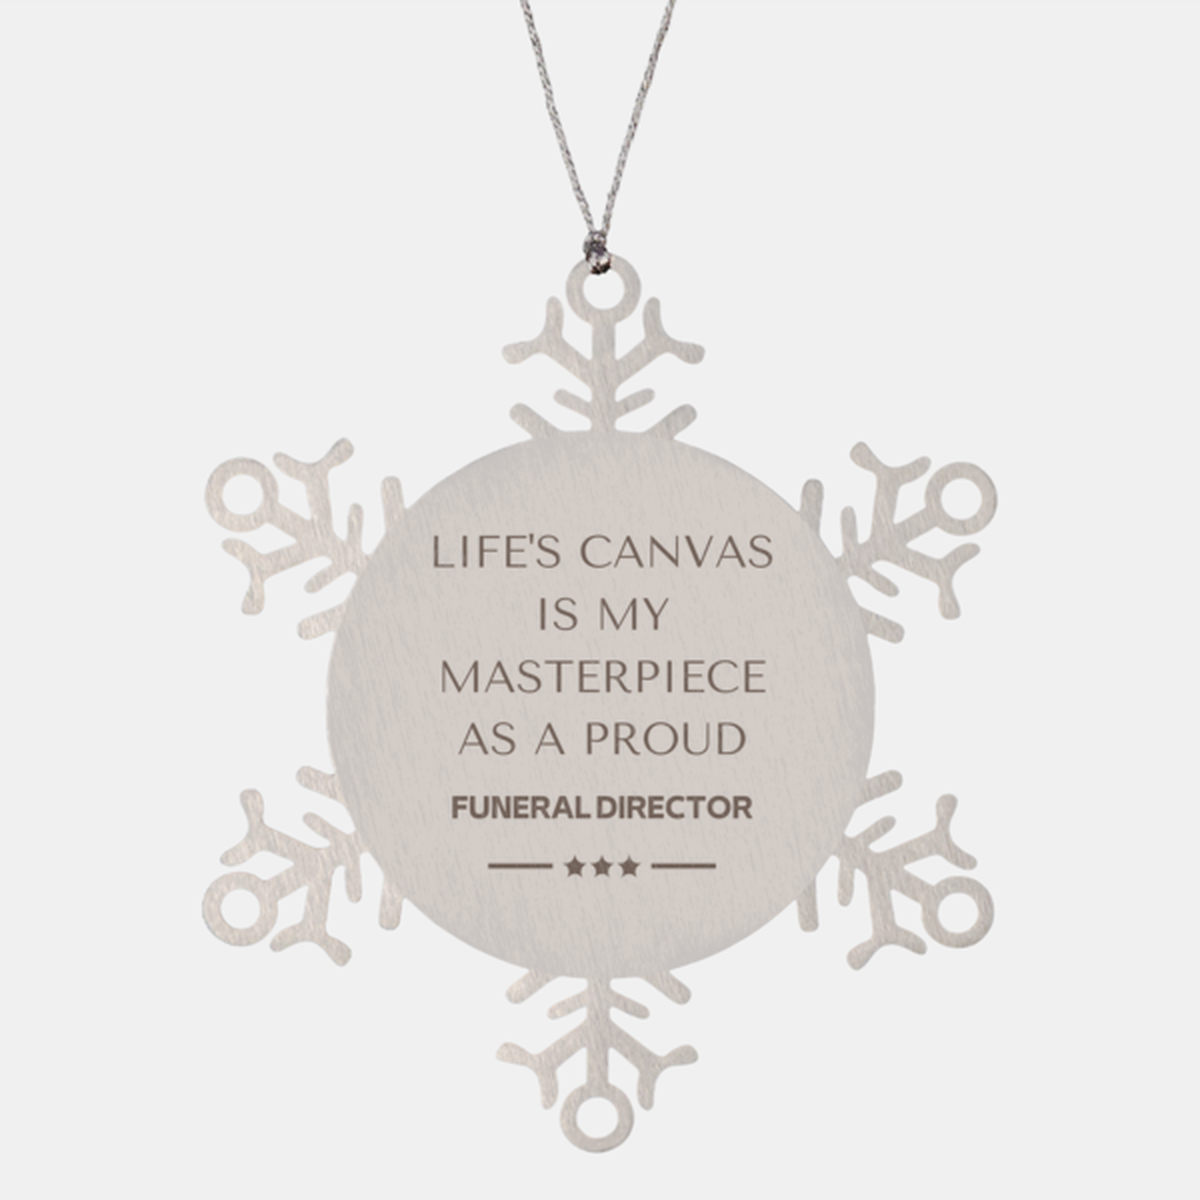 Proud Funeral Director Gifts, Life's canvas is my masterpiece, Epic Birthday Christmas Unique Snowflake Ornament For Funeral Director, Coworkers, Men, Women, Friends